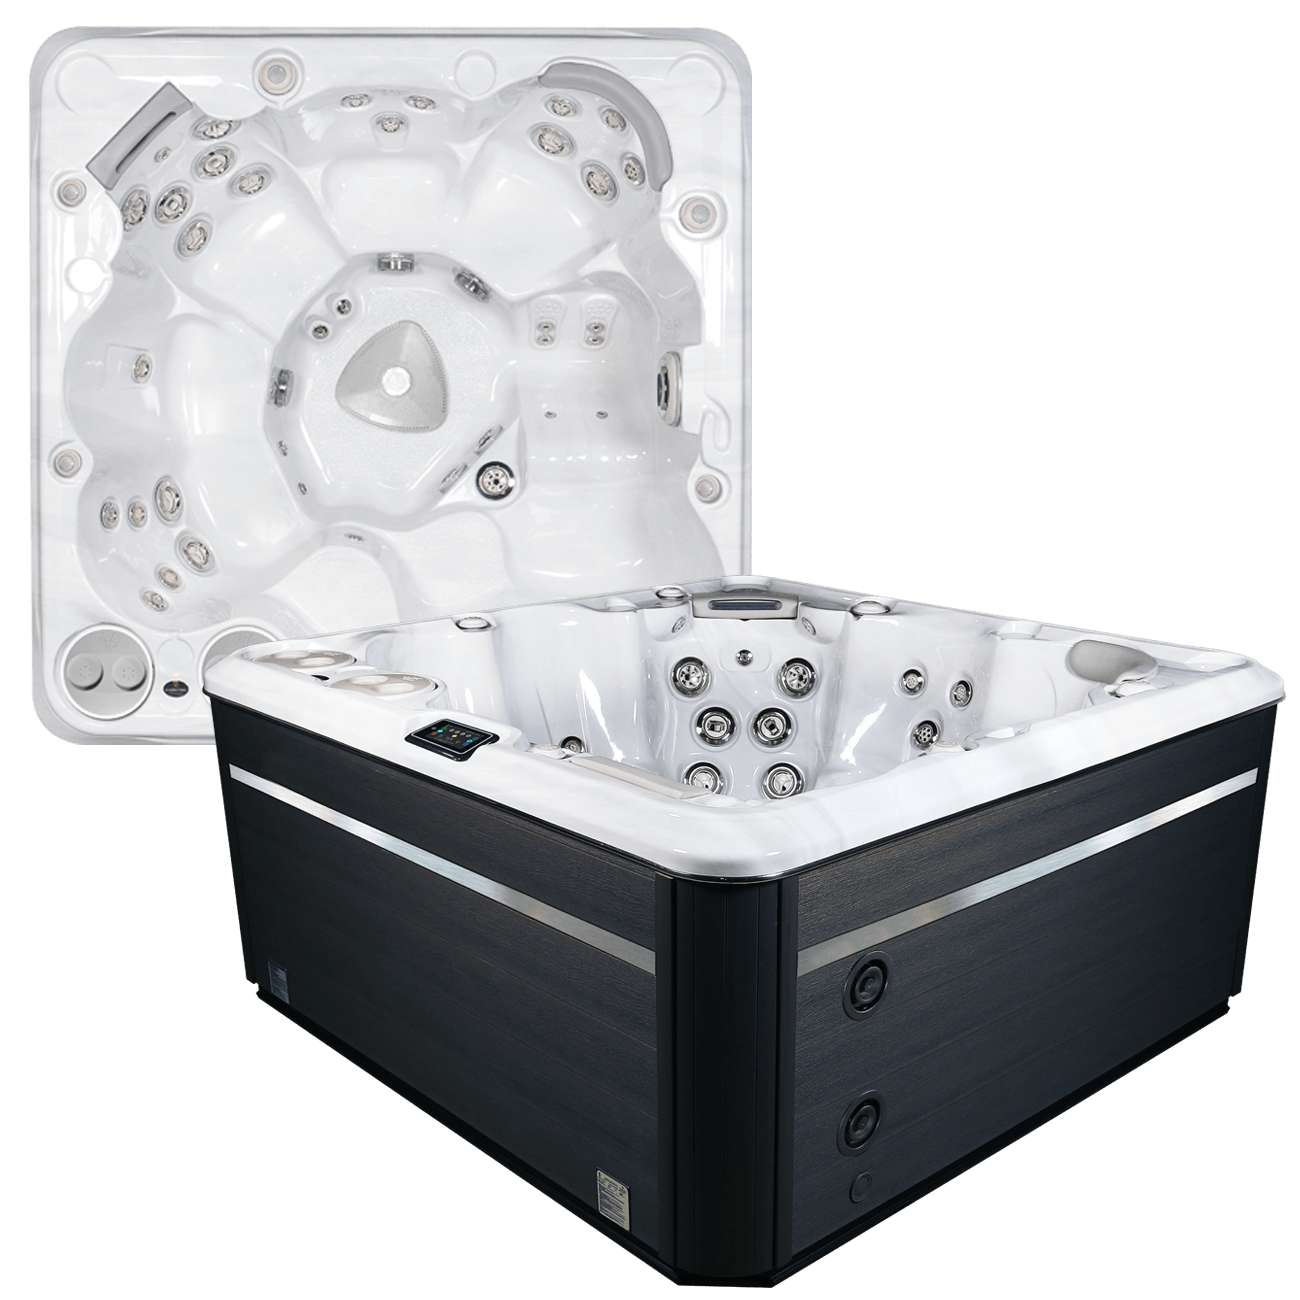 Hydropool Self-Cleaning 695 Gold hot tub product